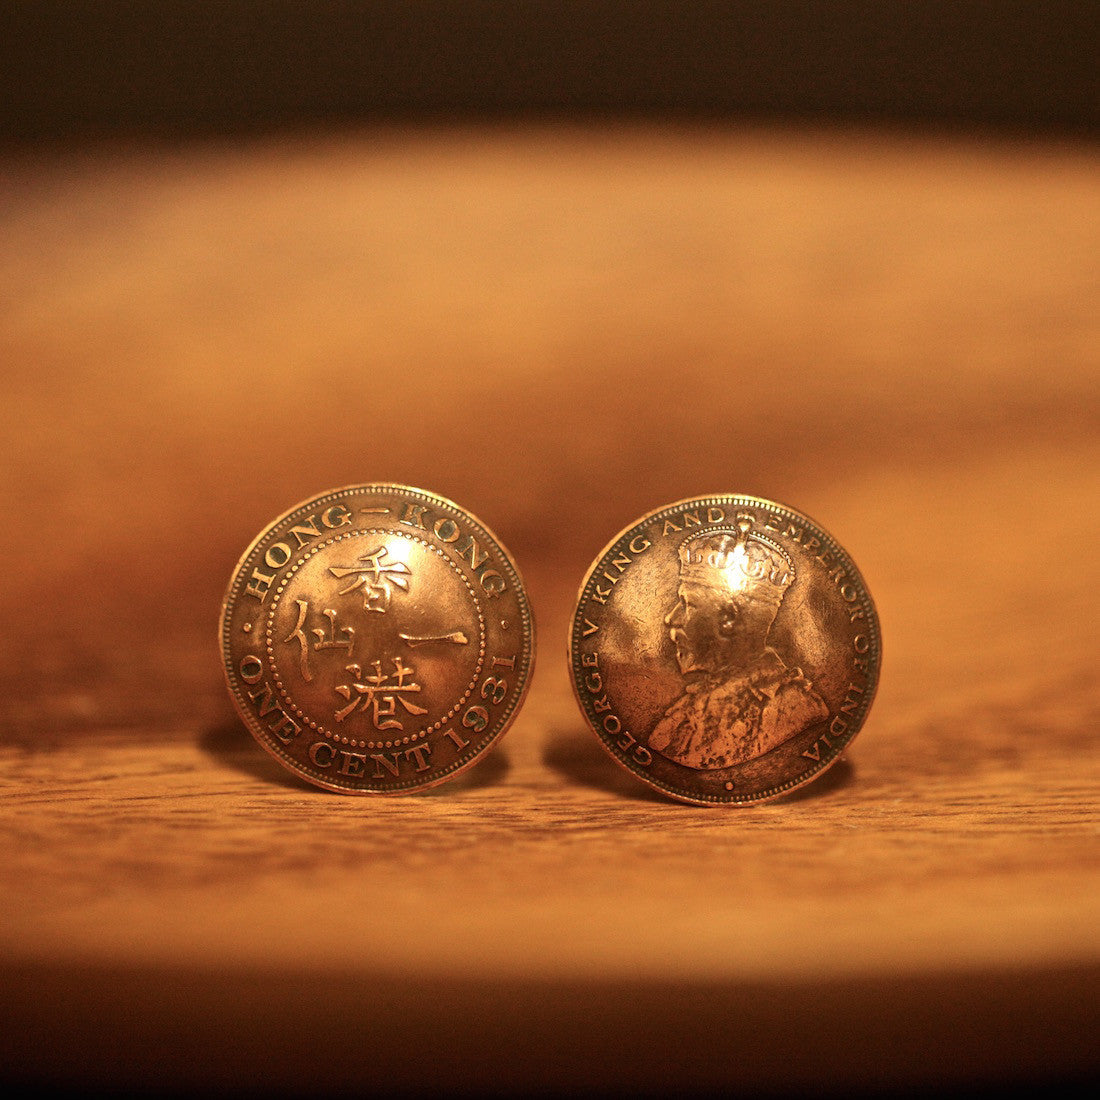 Cufflinks with Hong Kong Old 1 Cent in the 30's